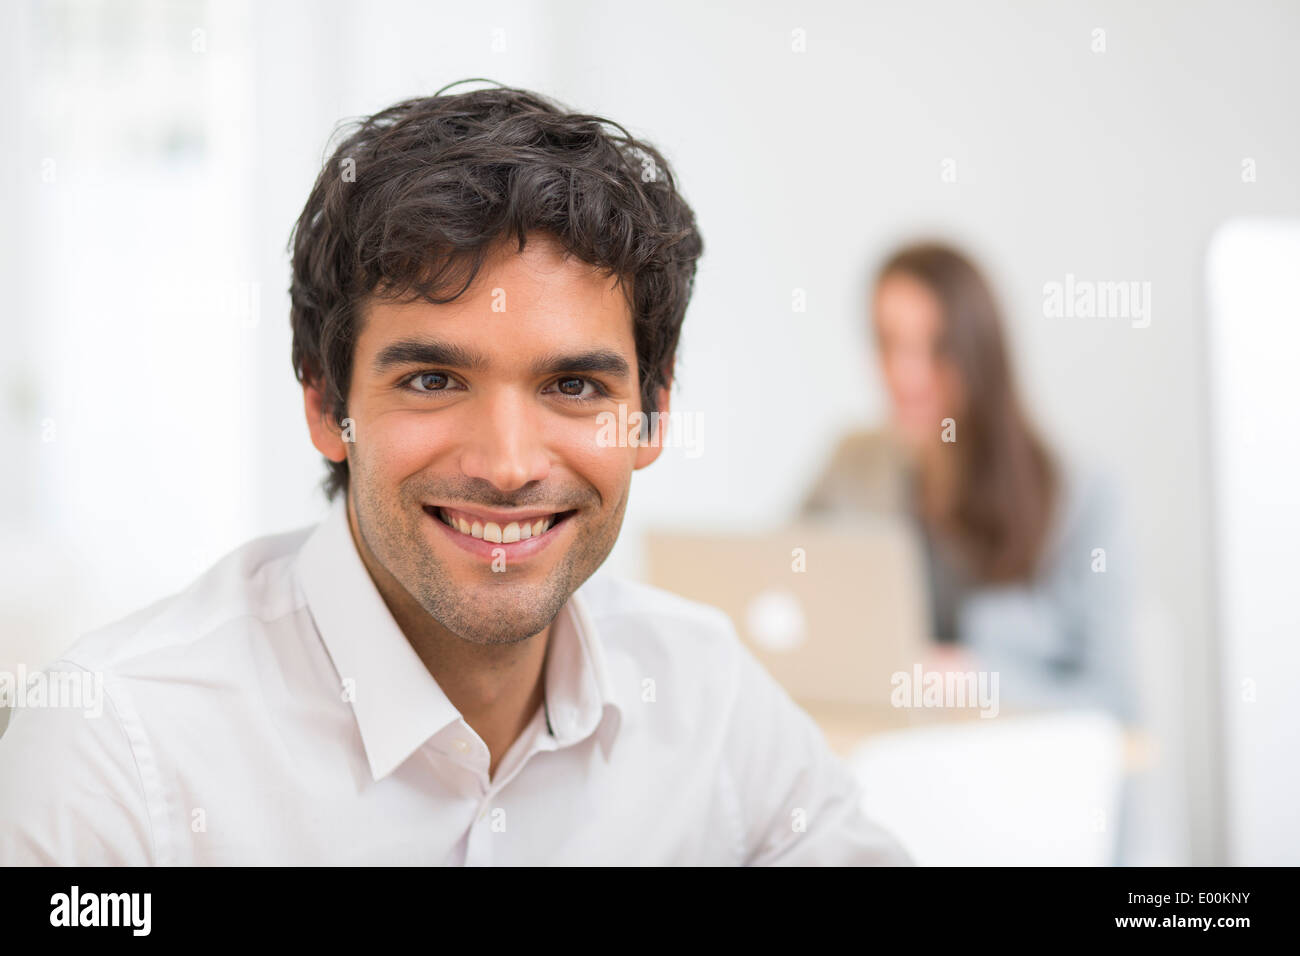 Male business handsome pc desk colleagues background Stock Photo